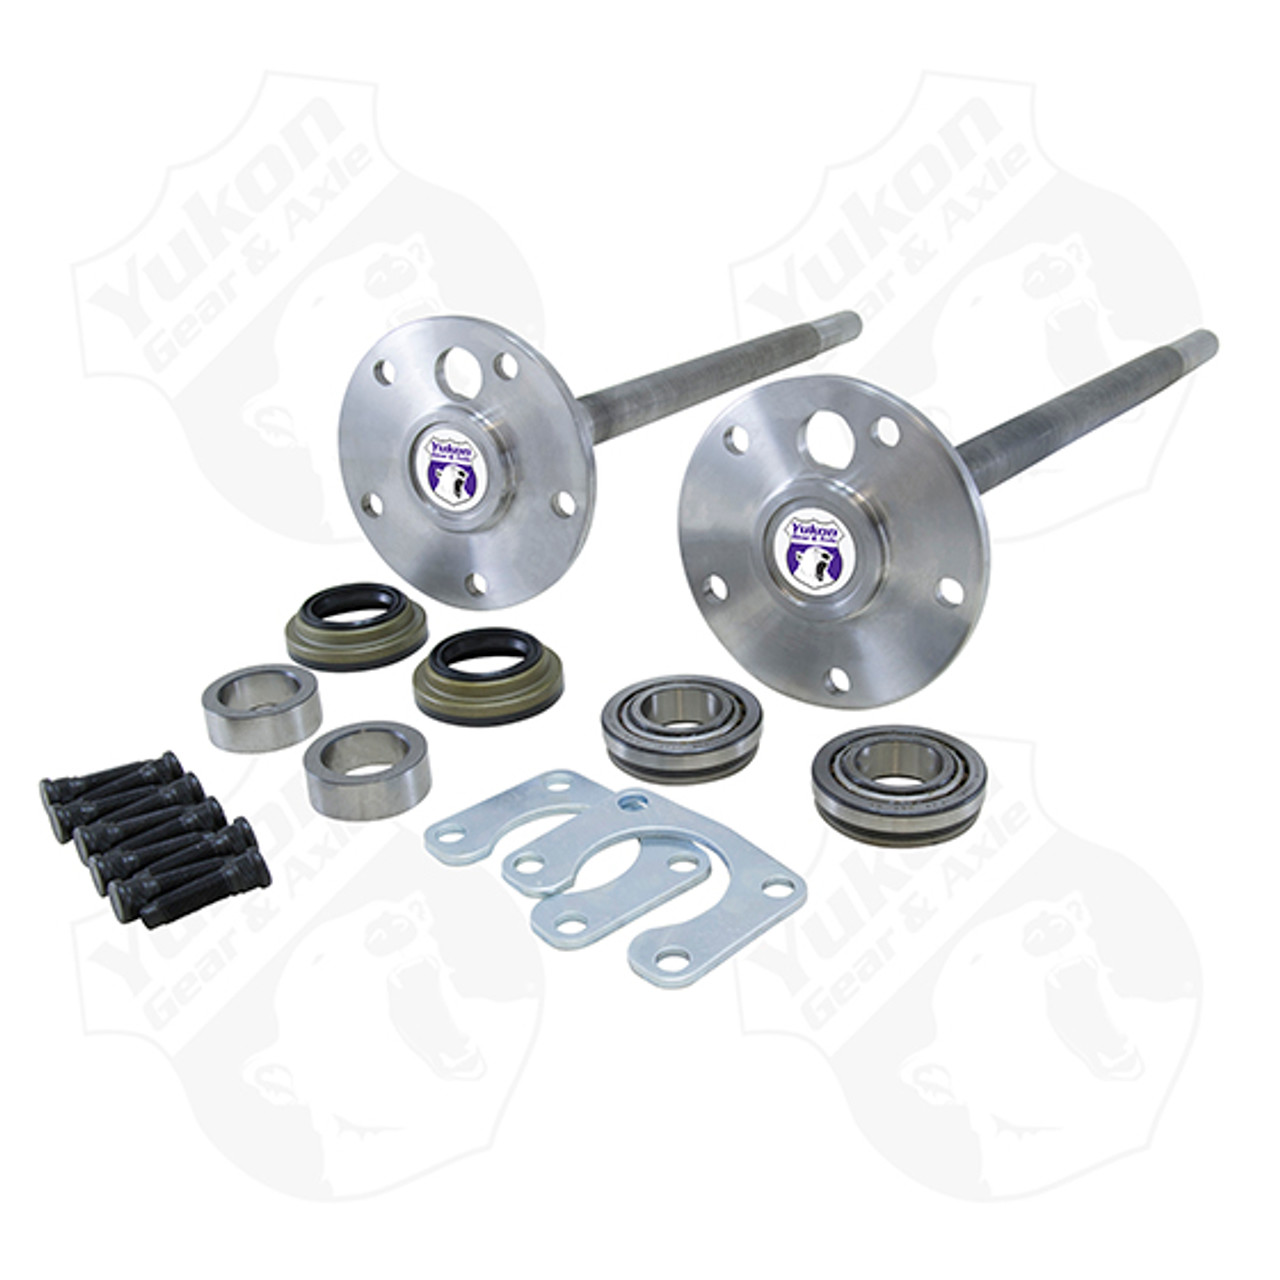 Yukon 1541H alloy rear axle kit for Ford 9" Bronco from '74-'75 with 31 splines